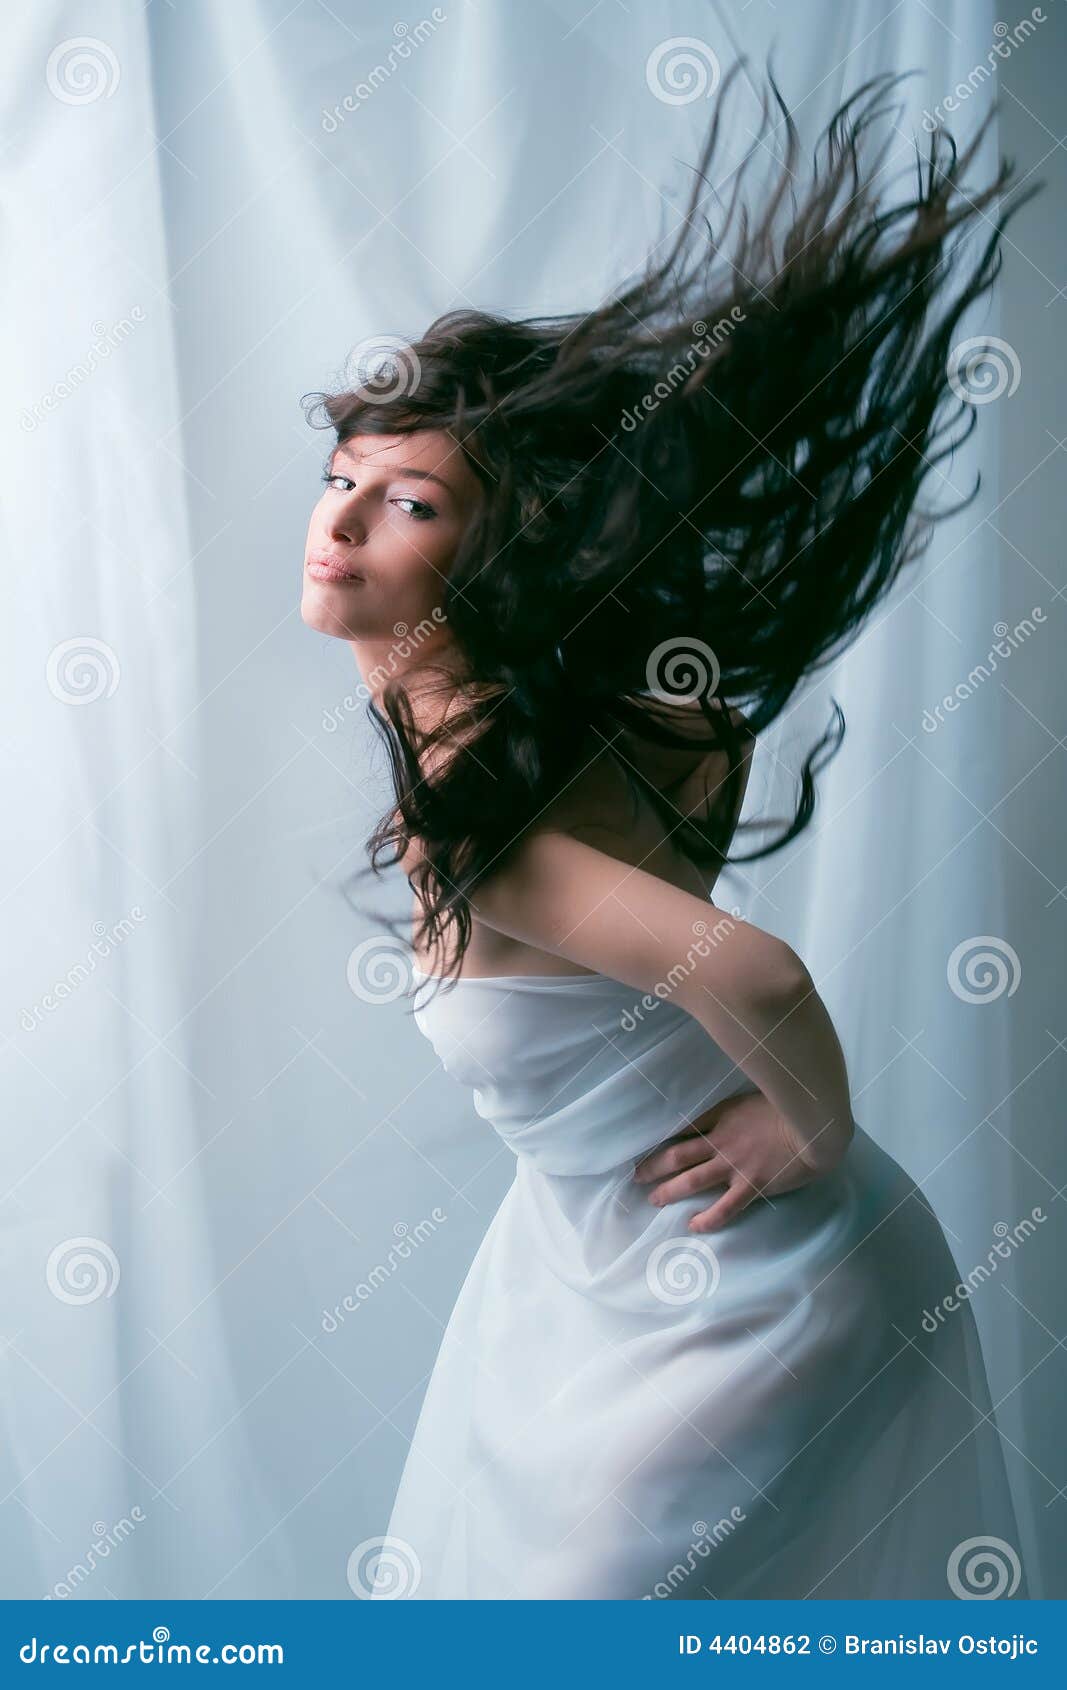 35,137 Flying Hair Stock Photos - Free & Royalty-Free Stock Photos from  Dreamstime